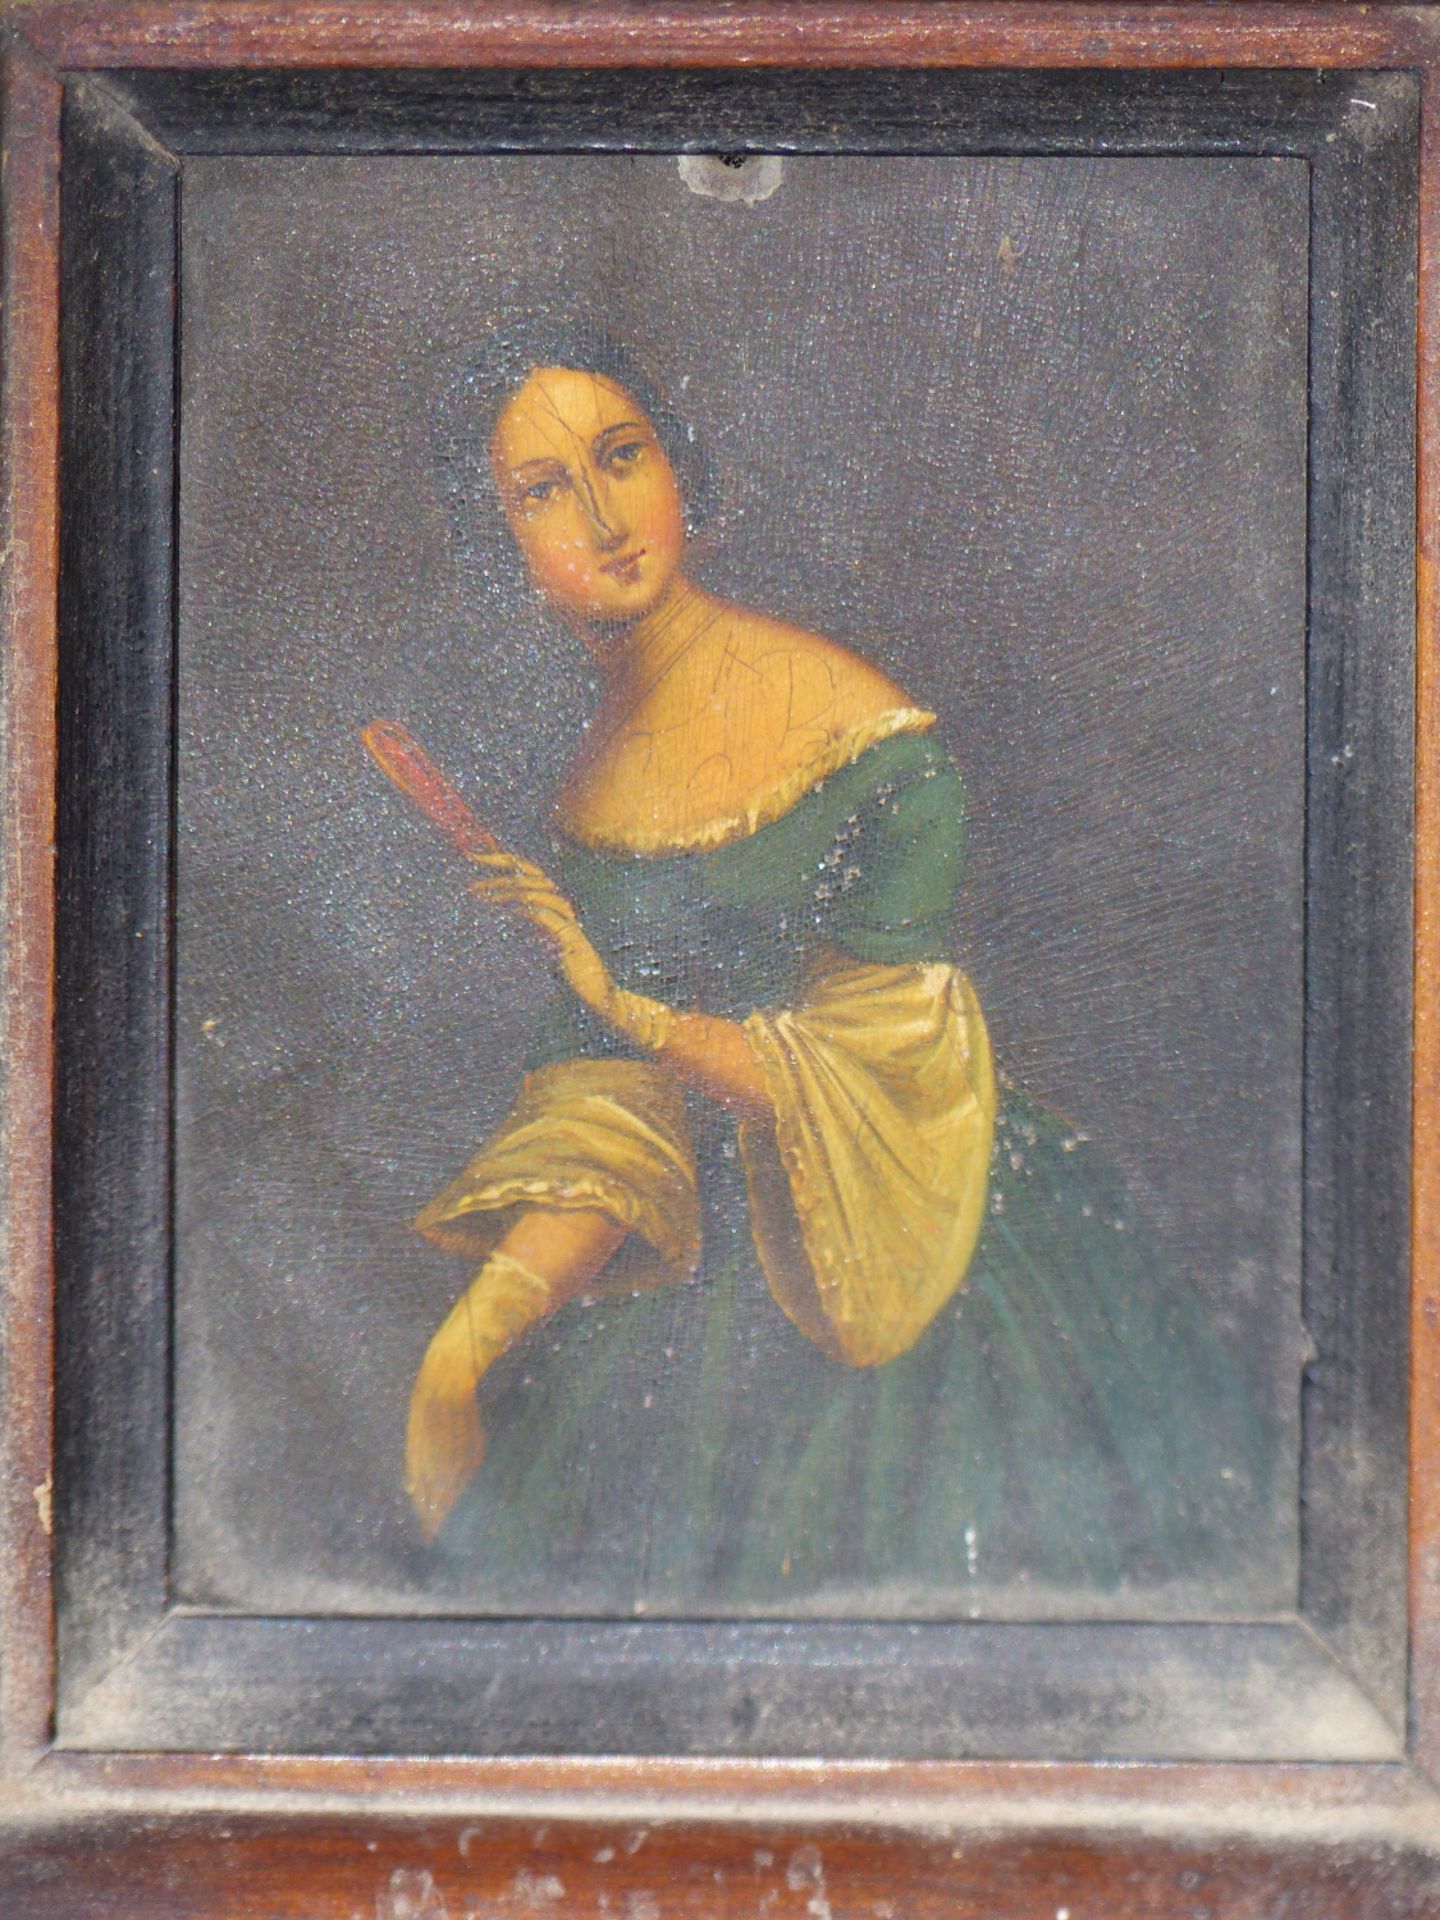 19TH CENTURY CONTINENTAL SCHOOL, STUDY OF A YOUNG LADY, OIL ON METAL PANEL. 7.5 X 10 cm.